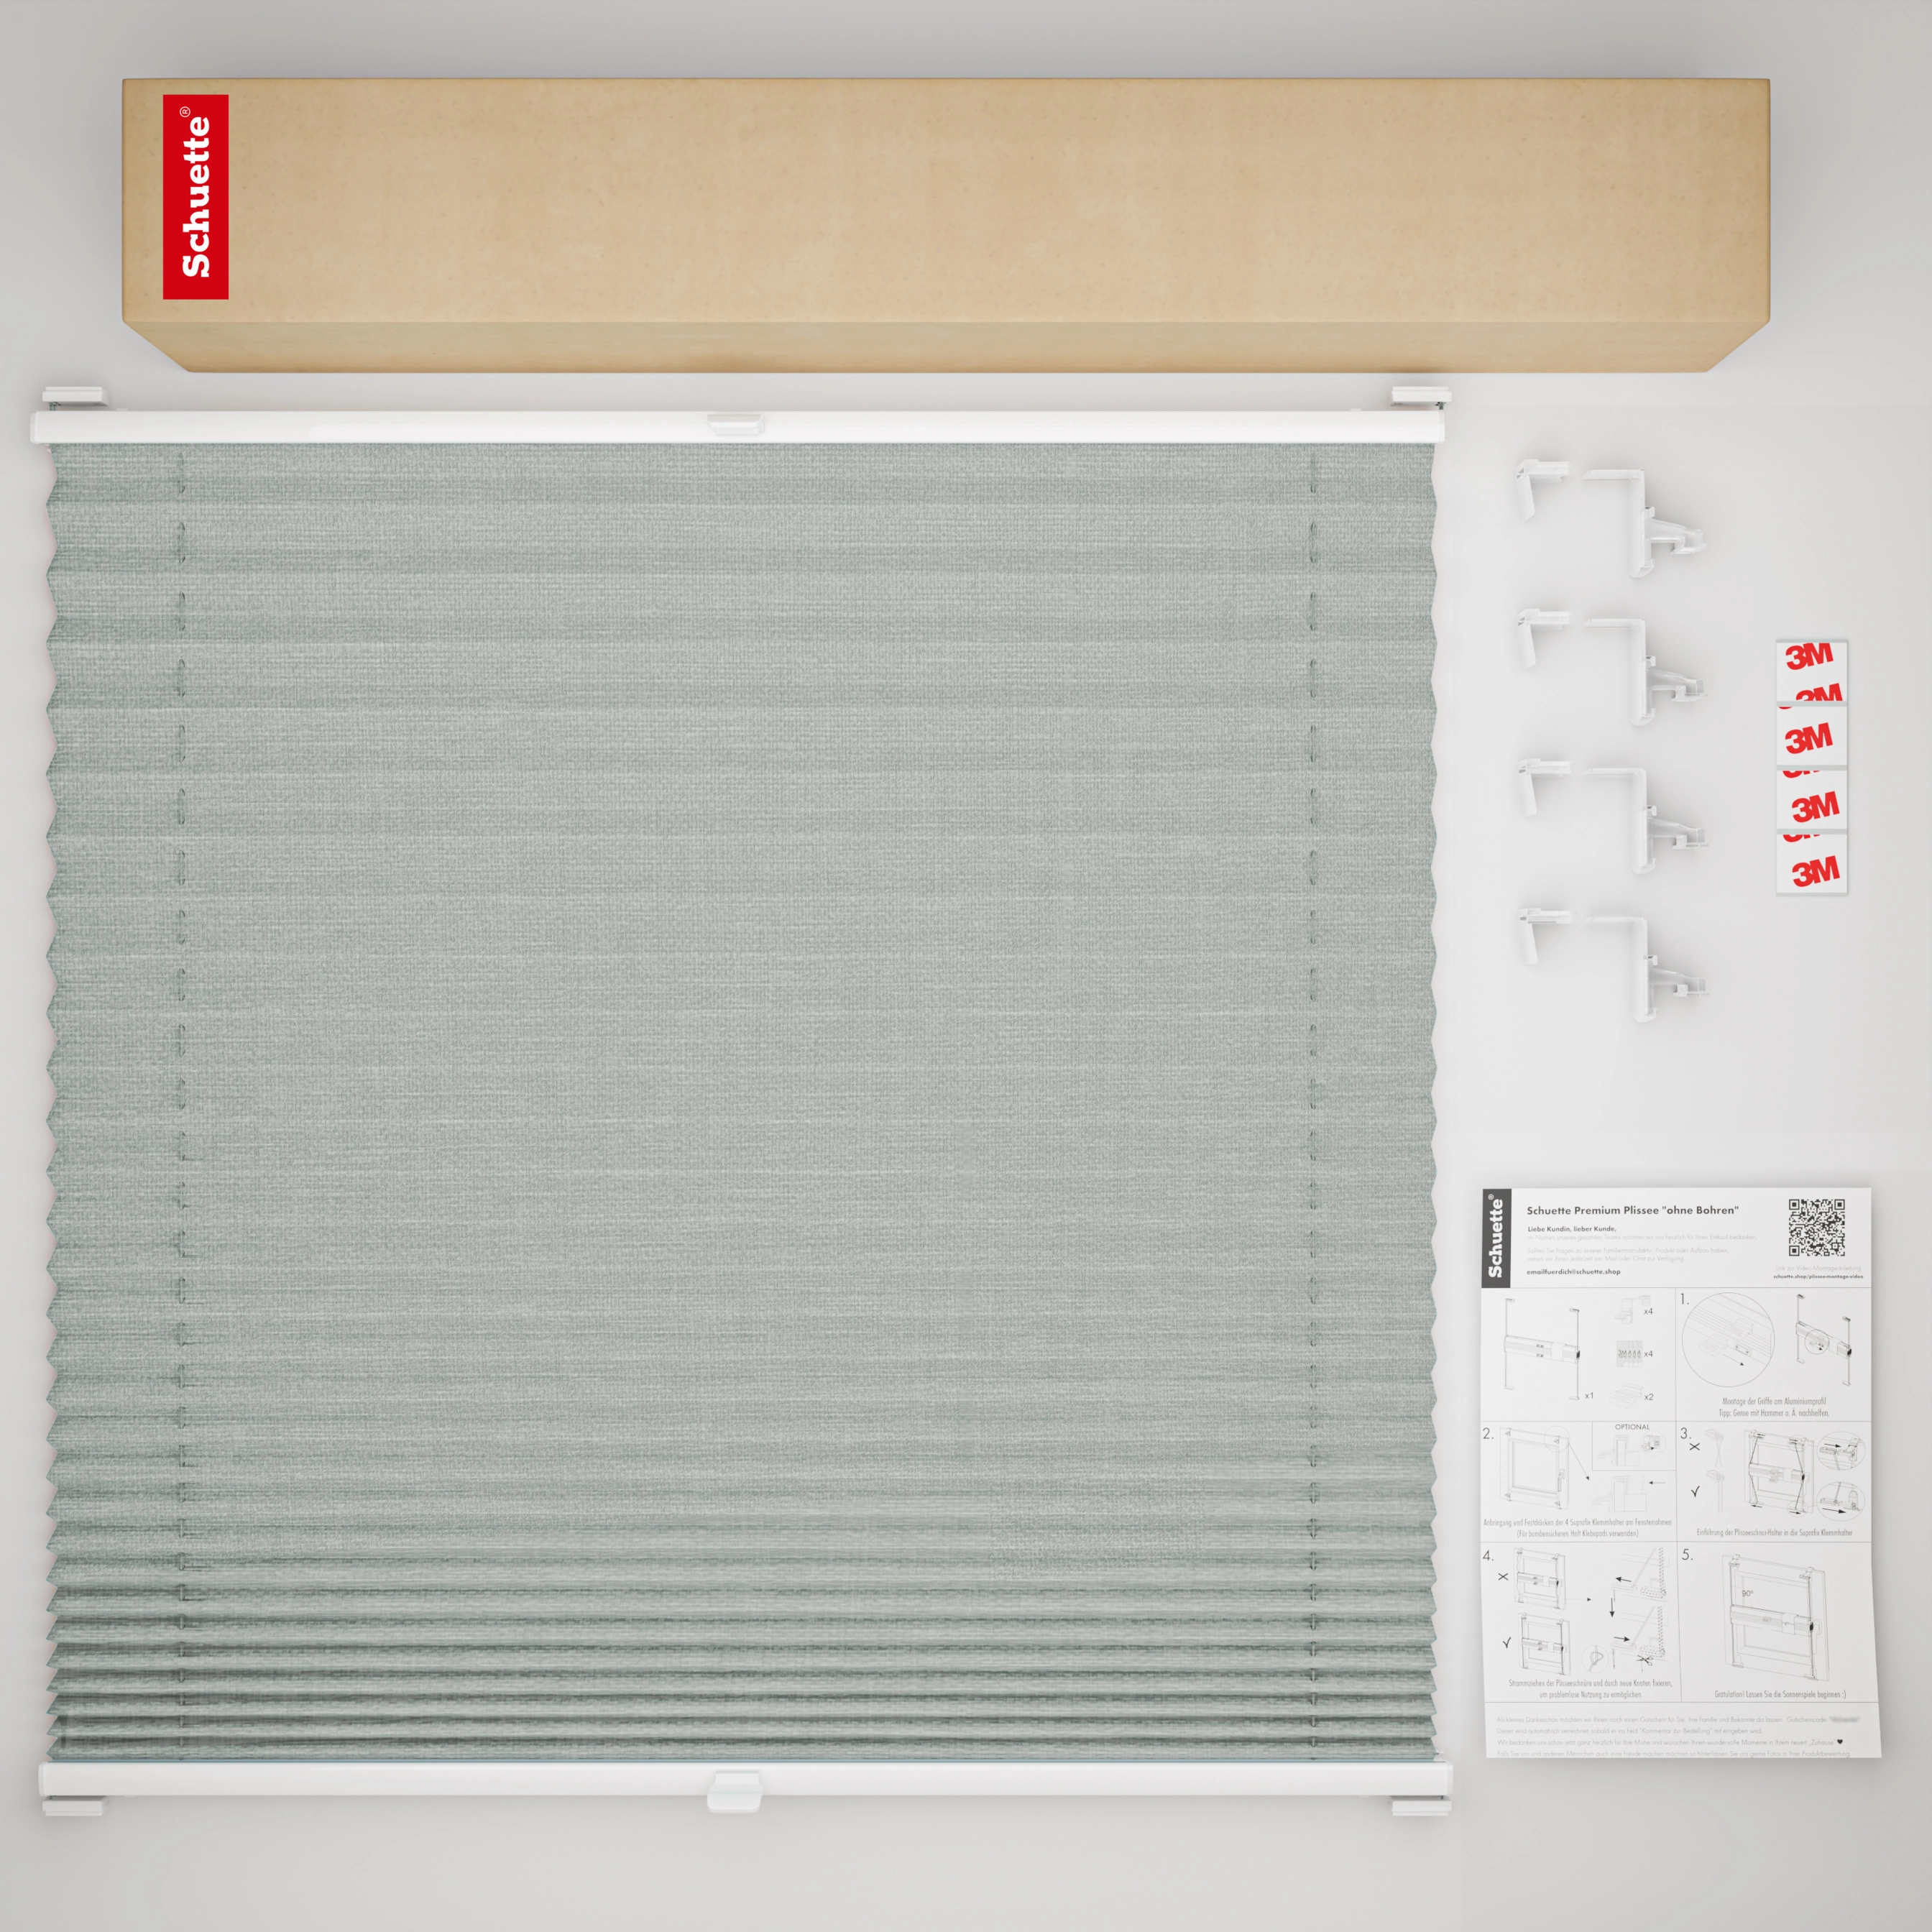 Schuette® Pleated Blind Made to Measure without Drilling • Suprafix Clamp holder “Incognito" Standard” • Melange Collection: On The Road (Grey) • Profile Colour: White